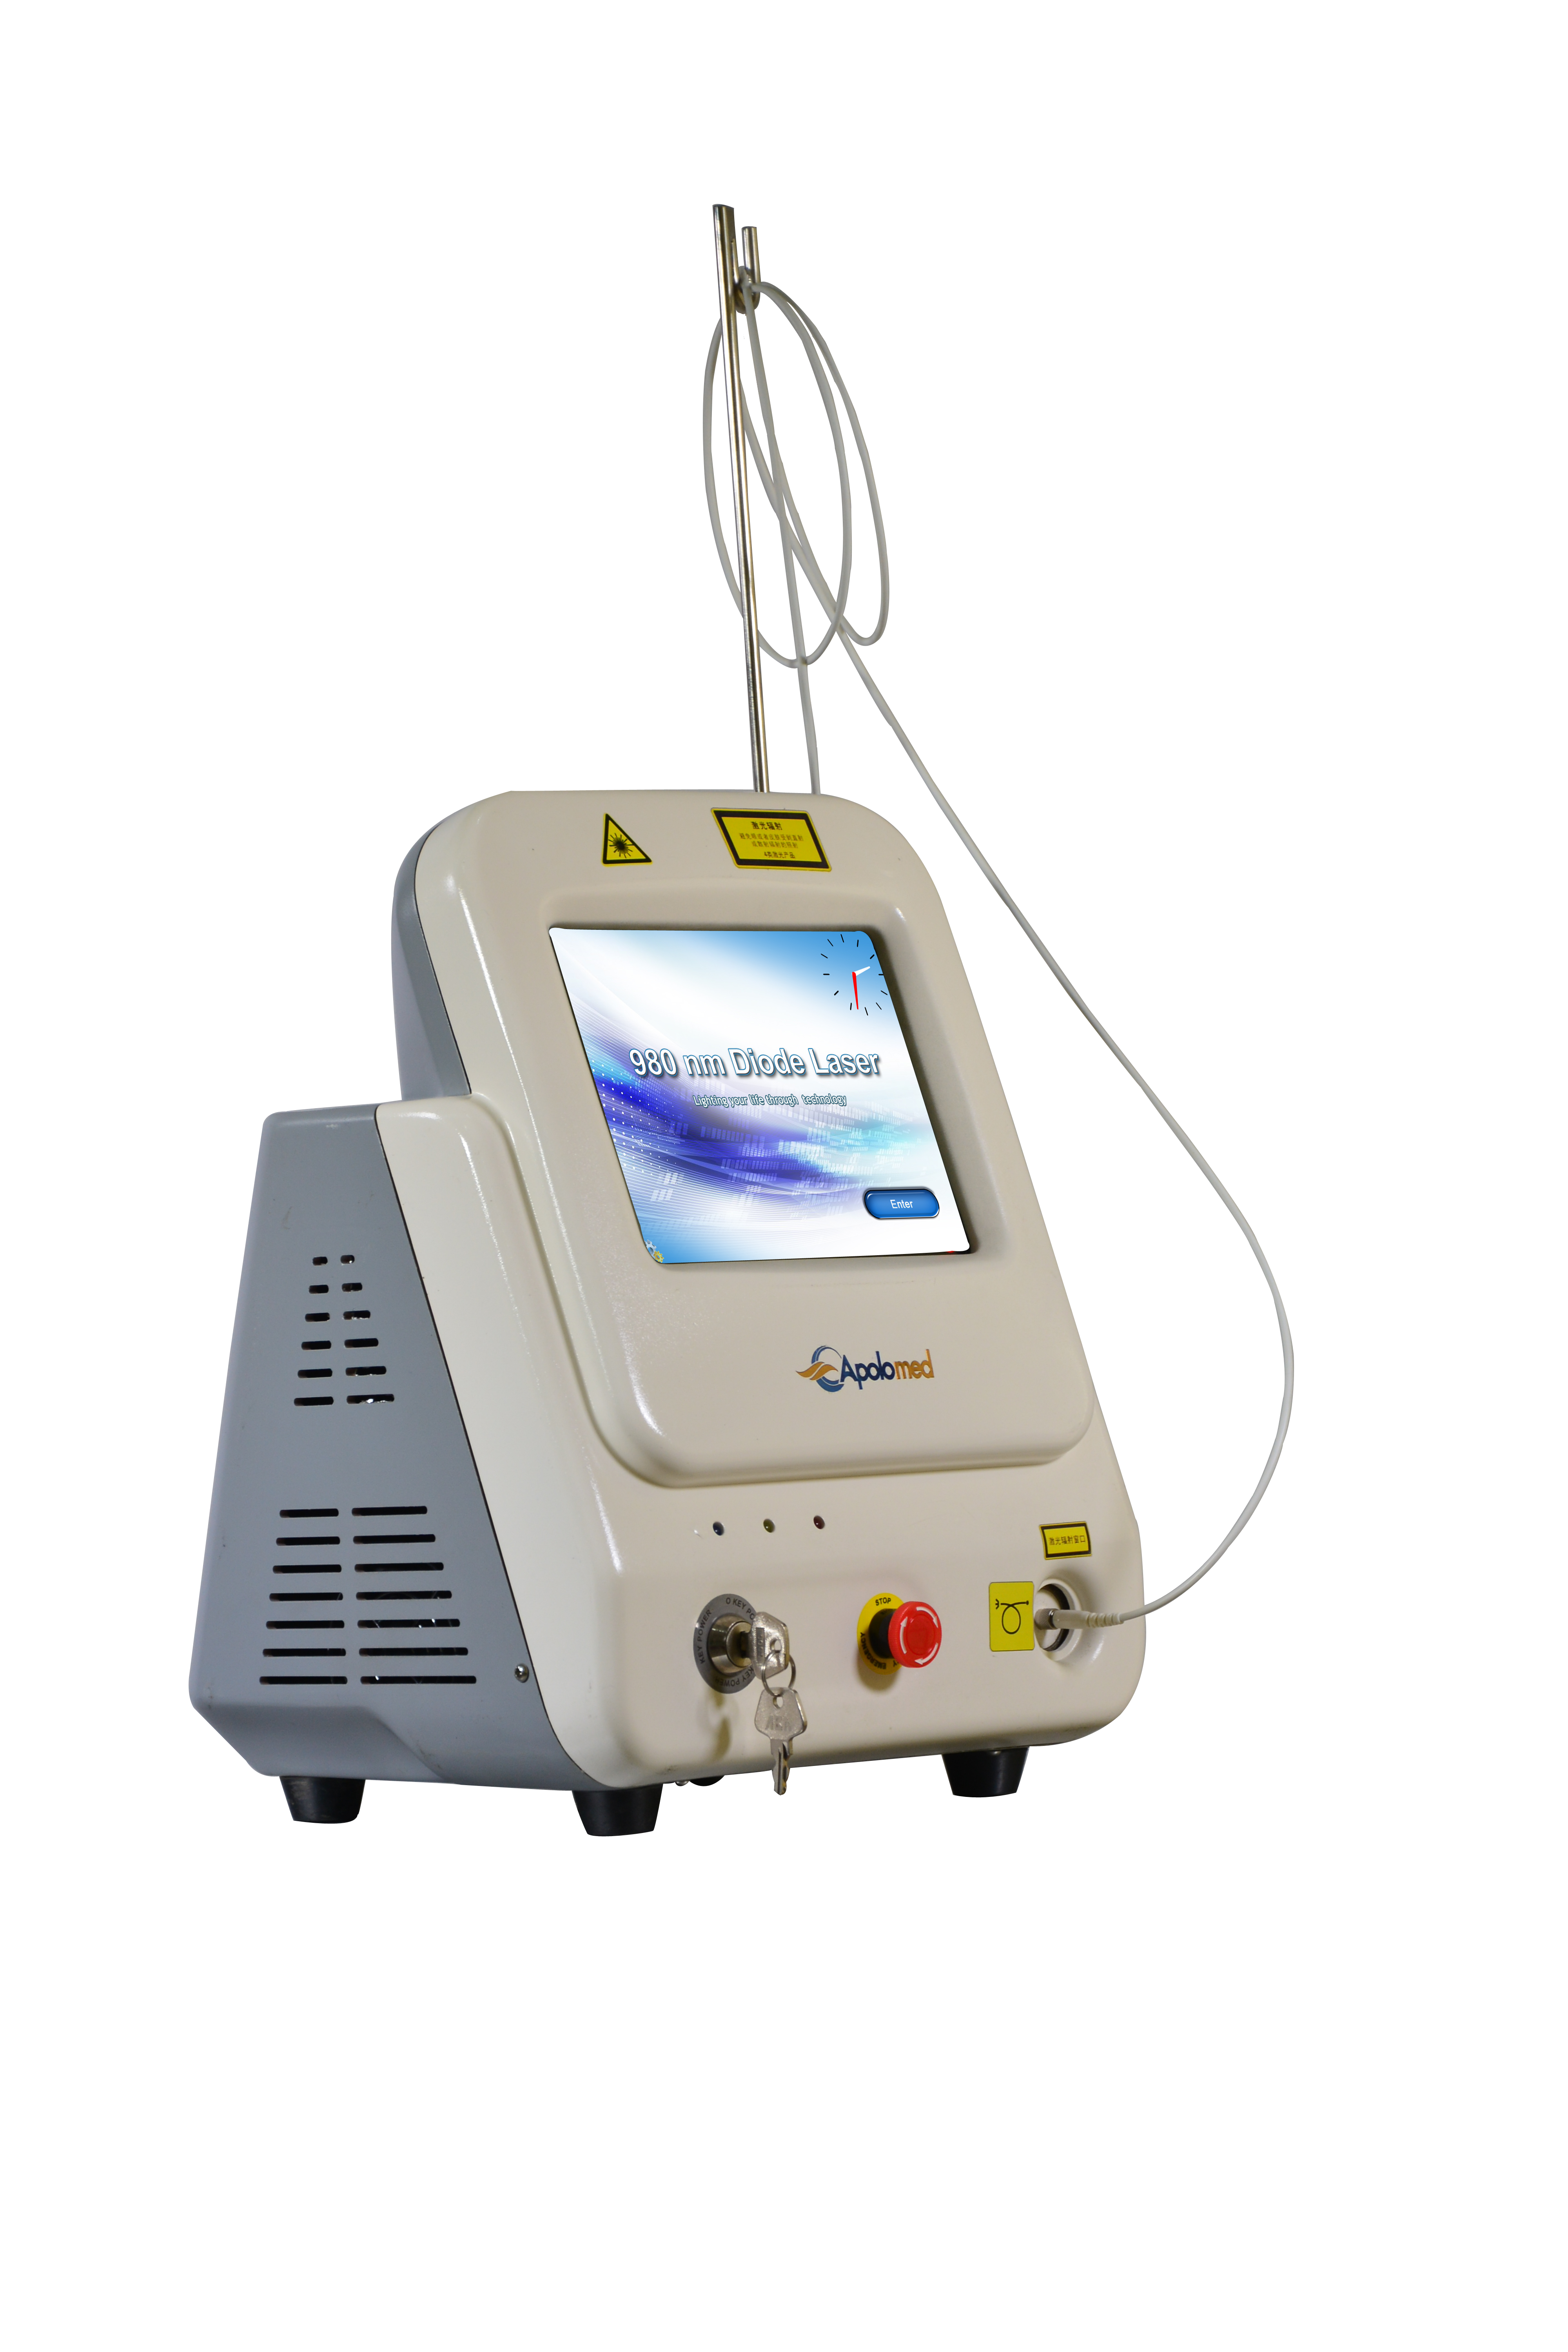 60W Portable Spider Vein Removal 980nm Diode Laser